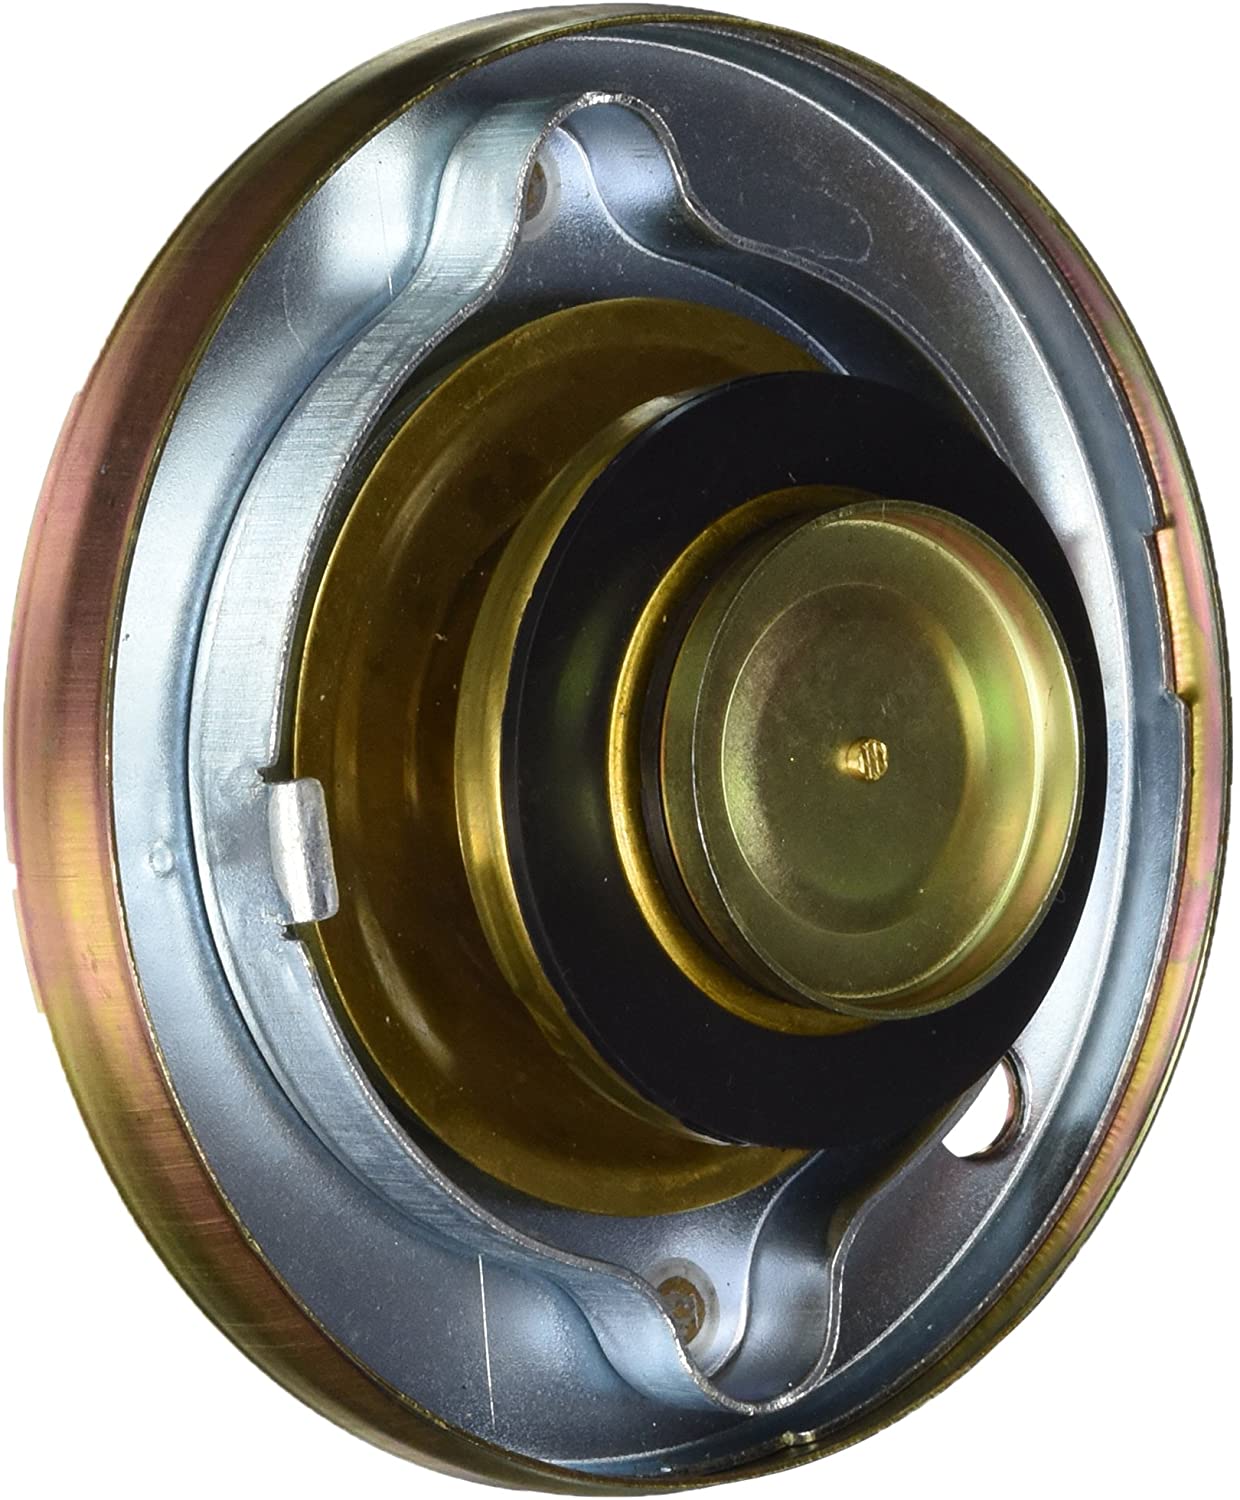 Vented Fuel Cap for Transfer Tanks Image